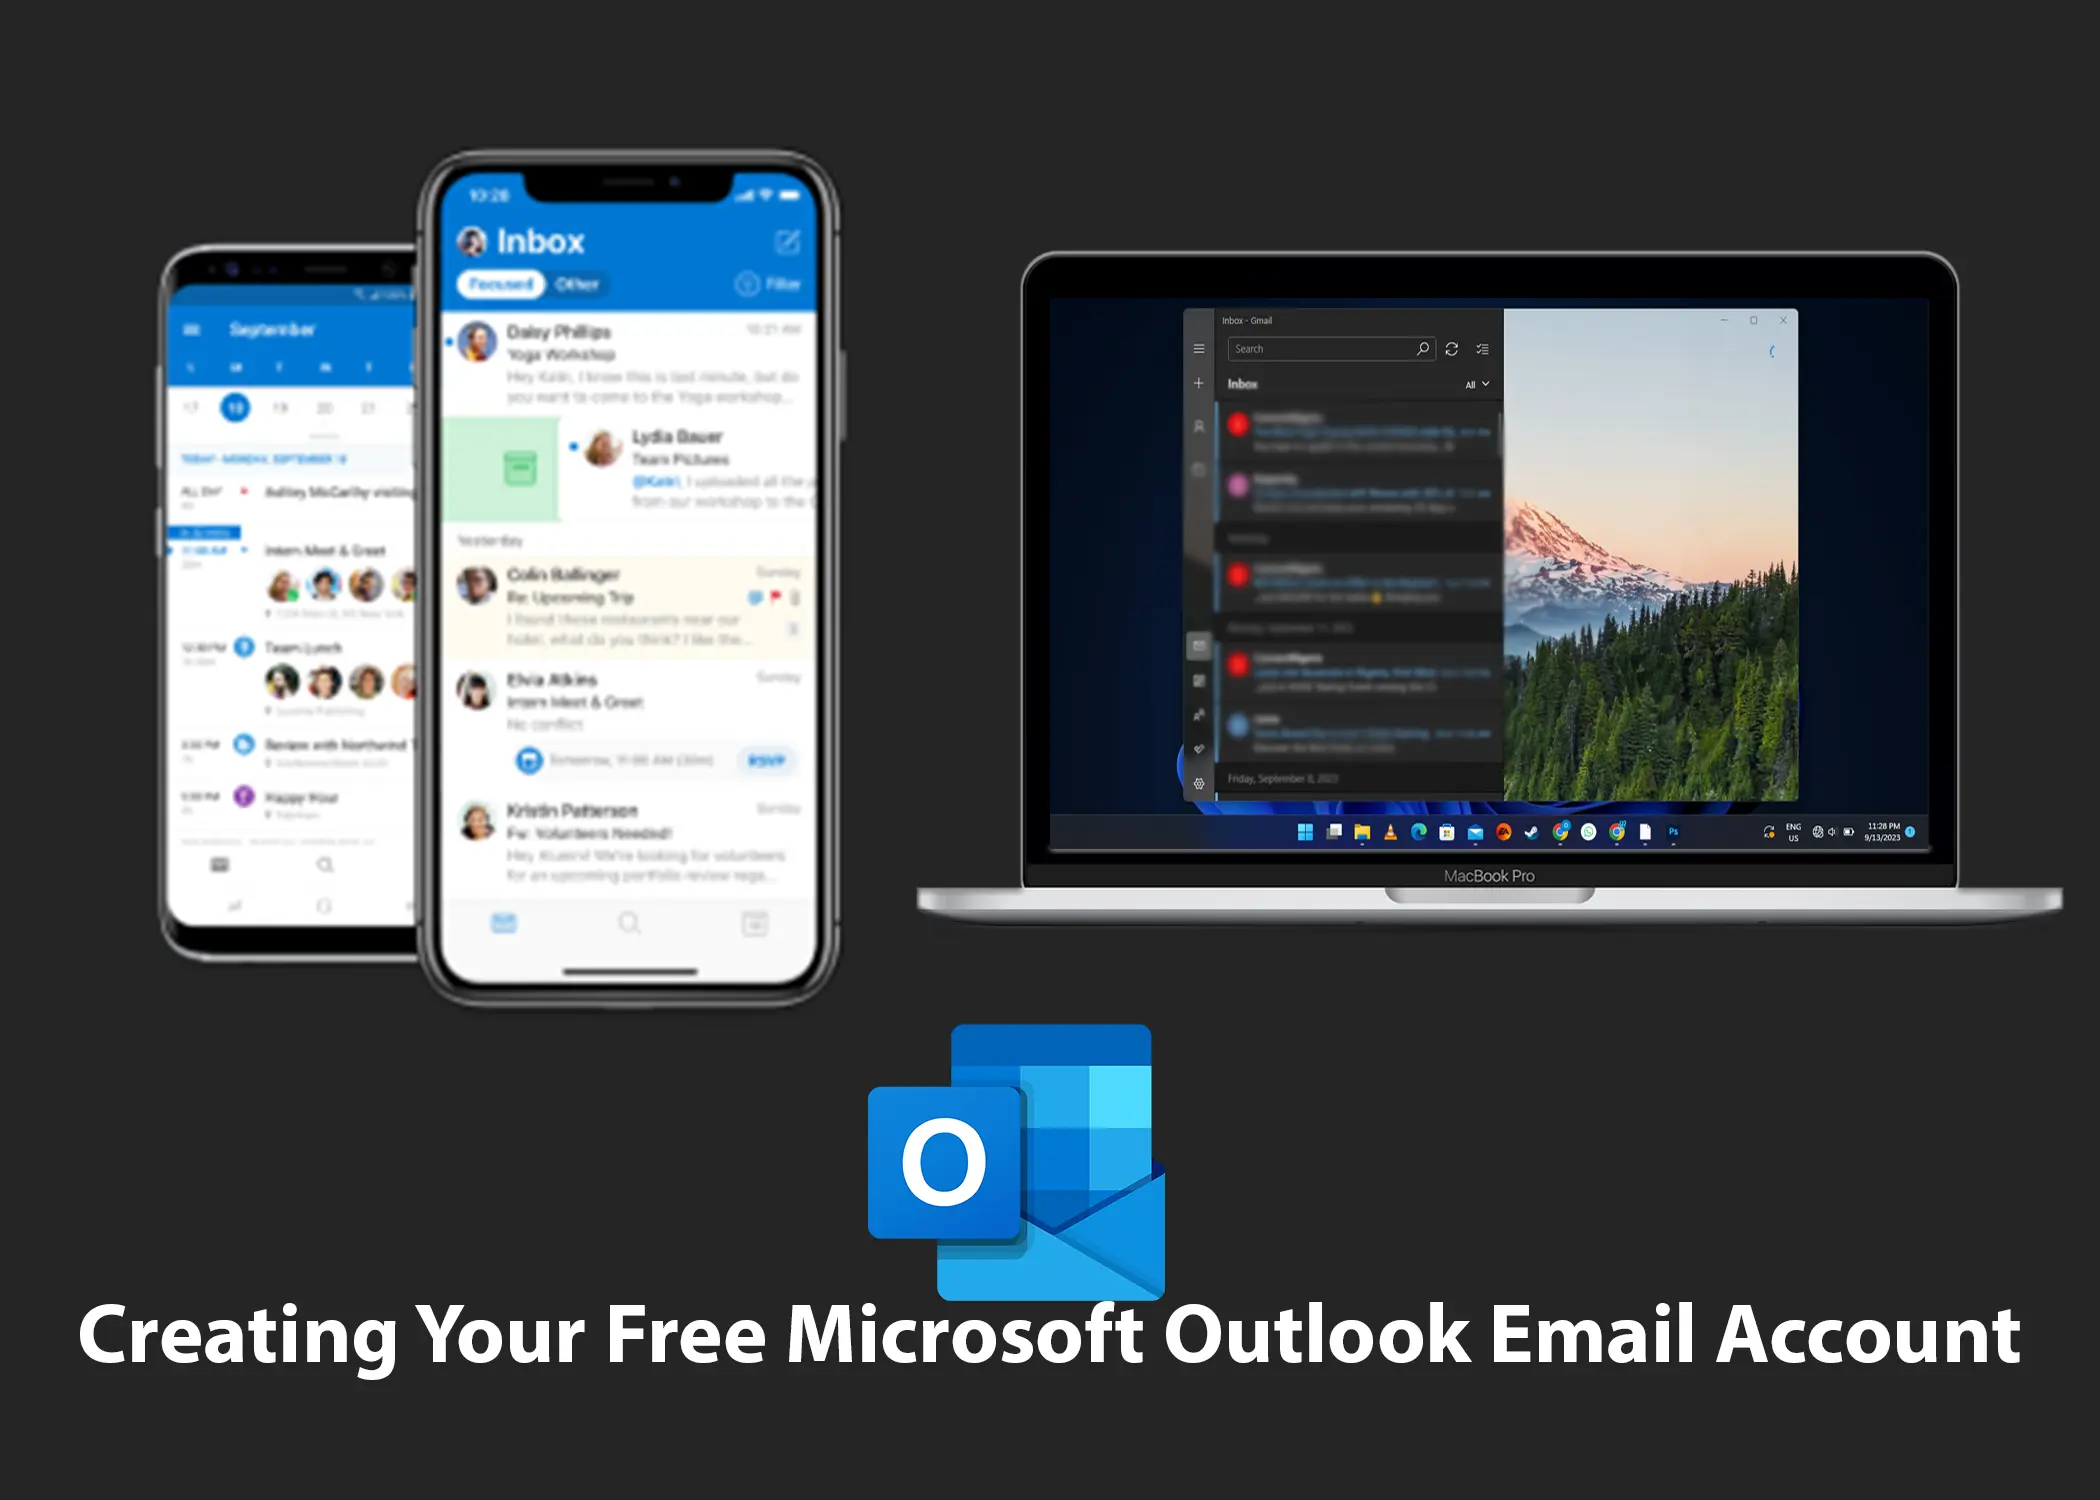 How to Create A Free Microsoft Outlook Email Account